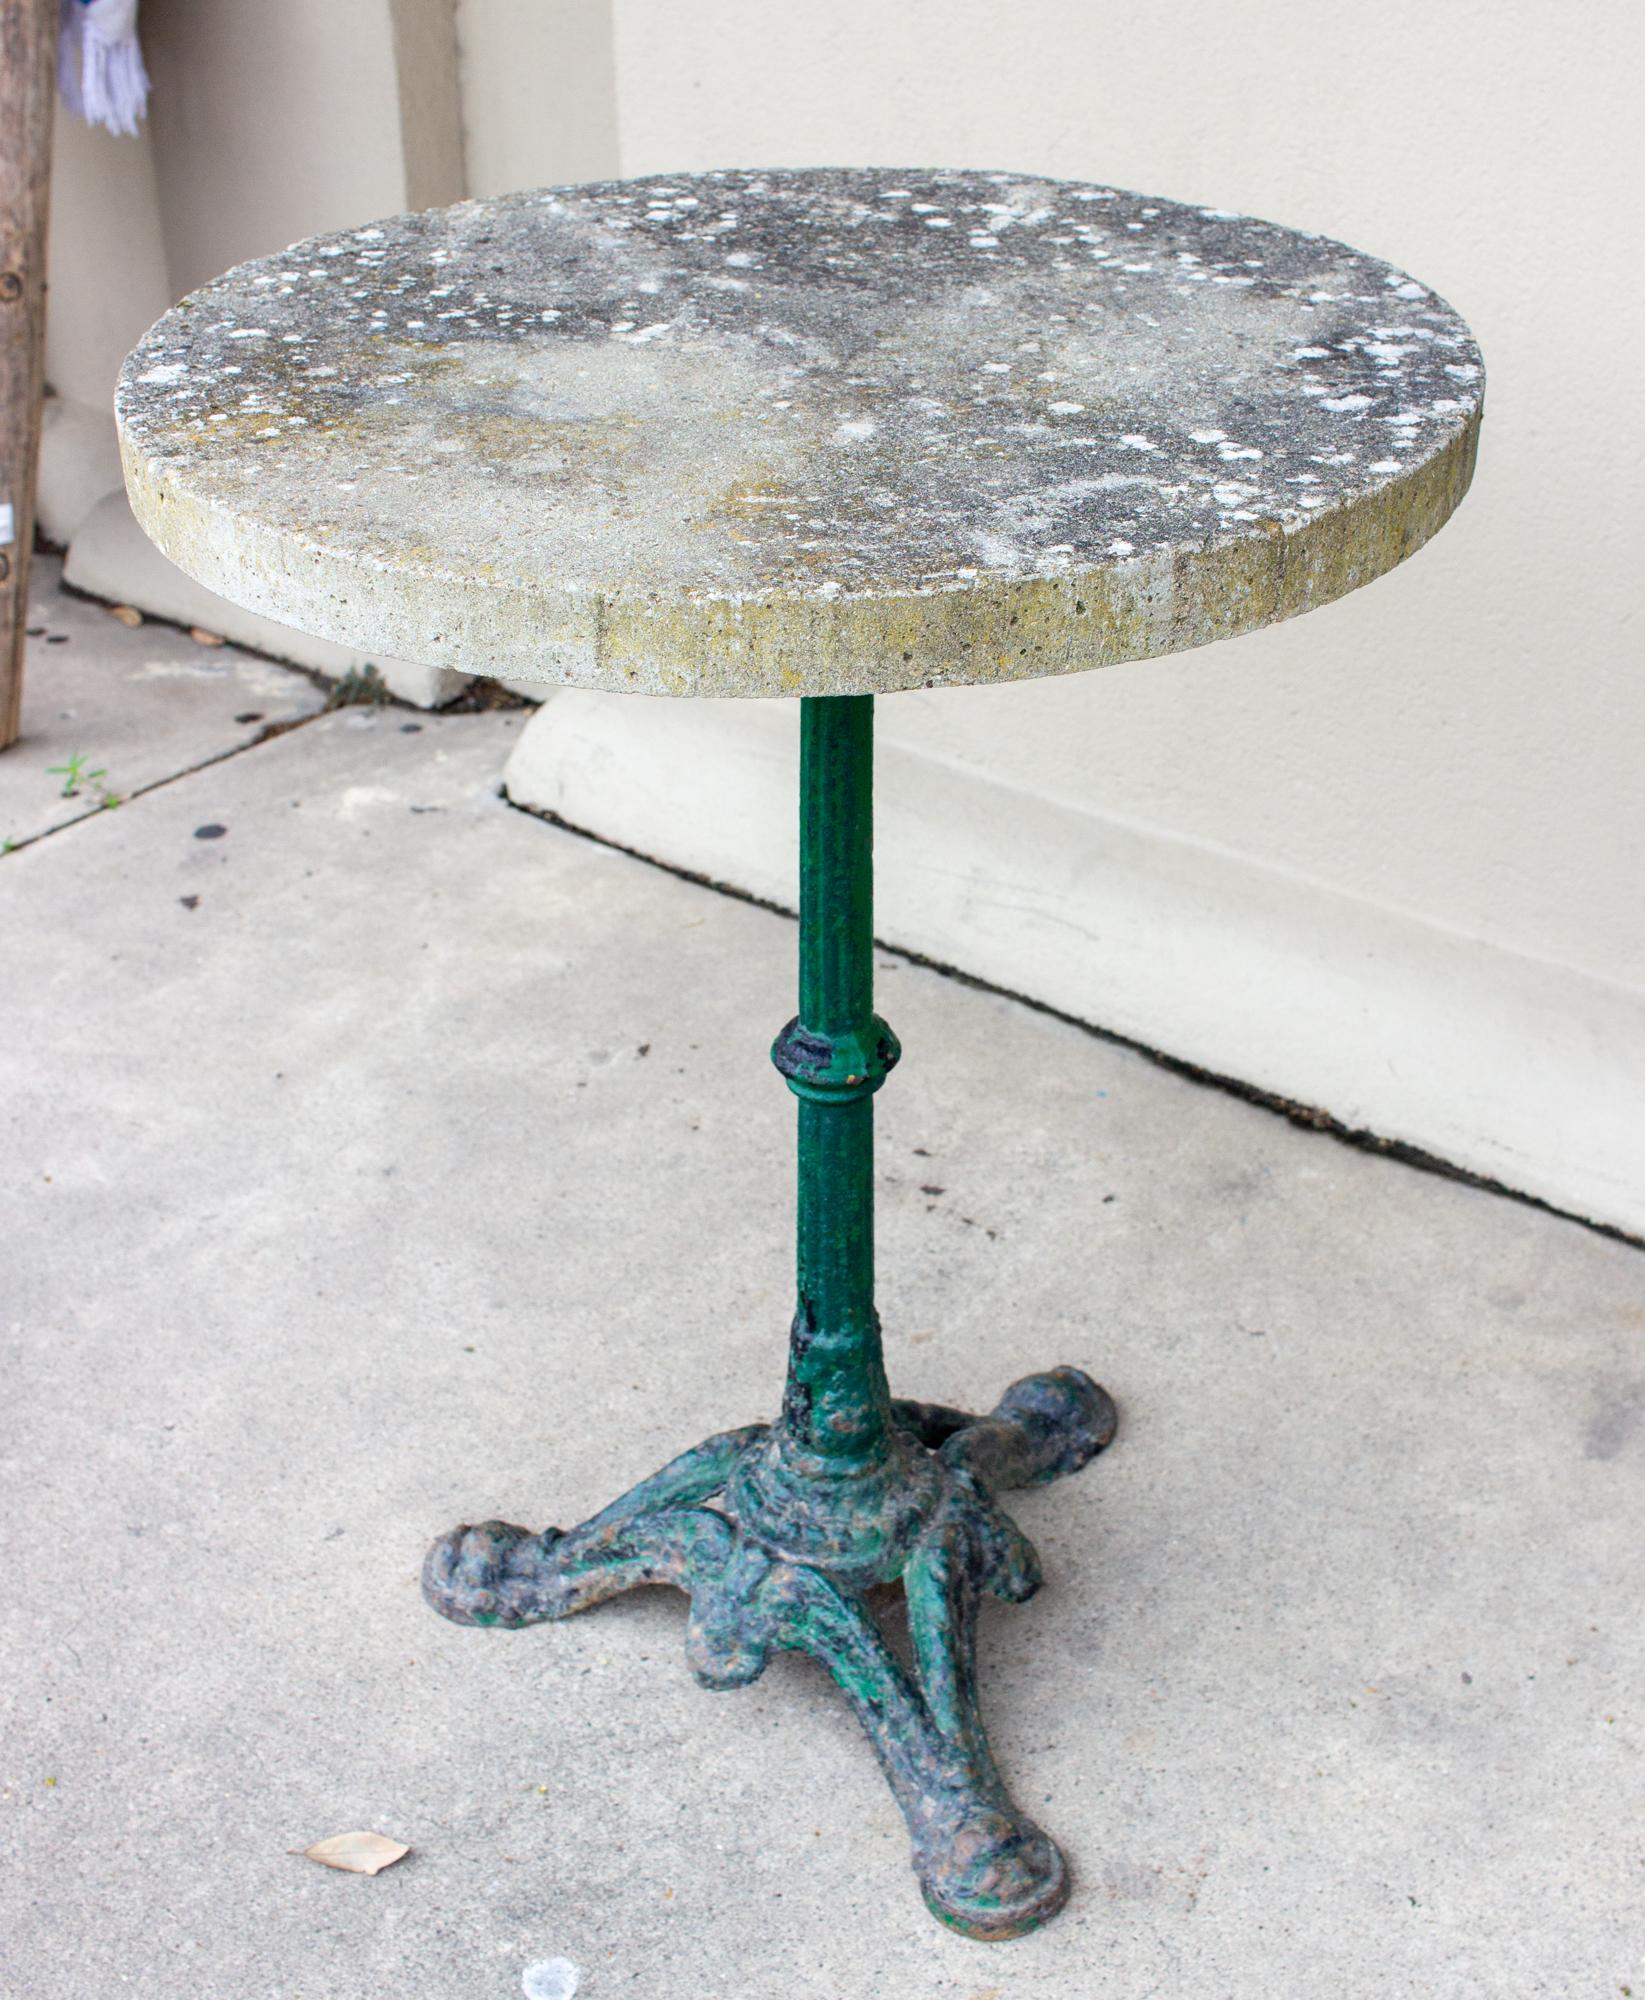 French Antique Cast Iron Bistro Table with Concrete Top Found in France